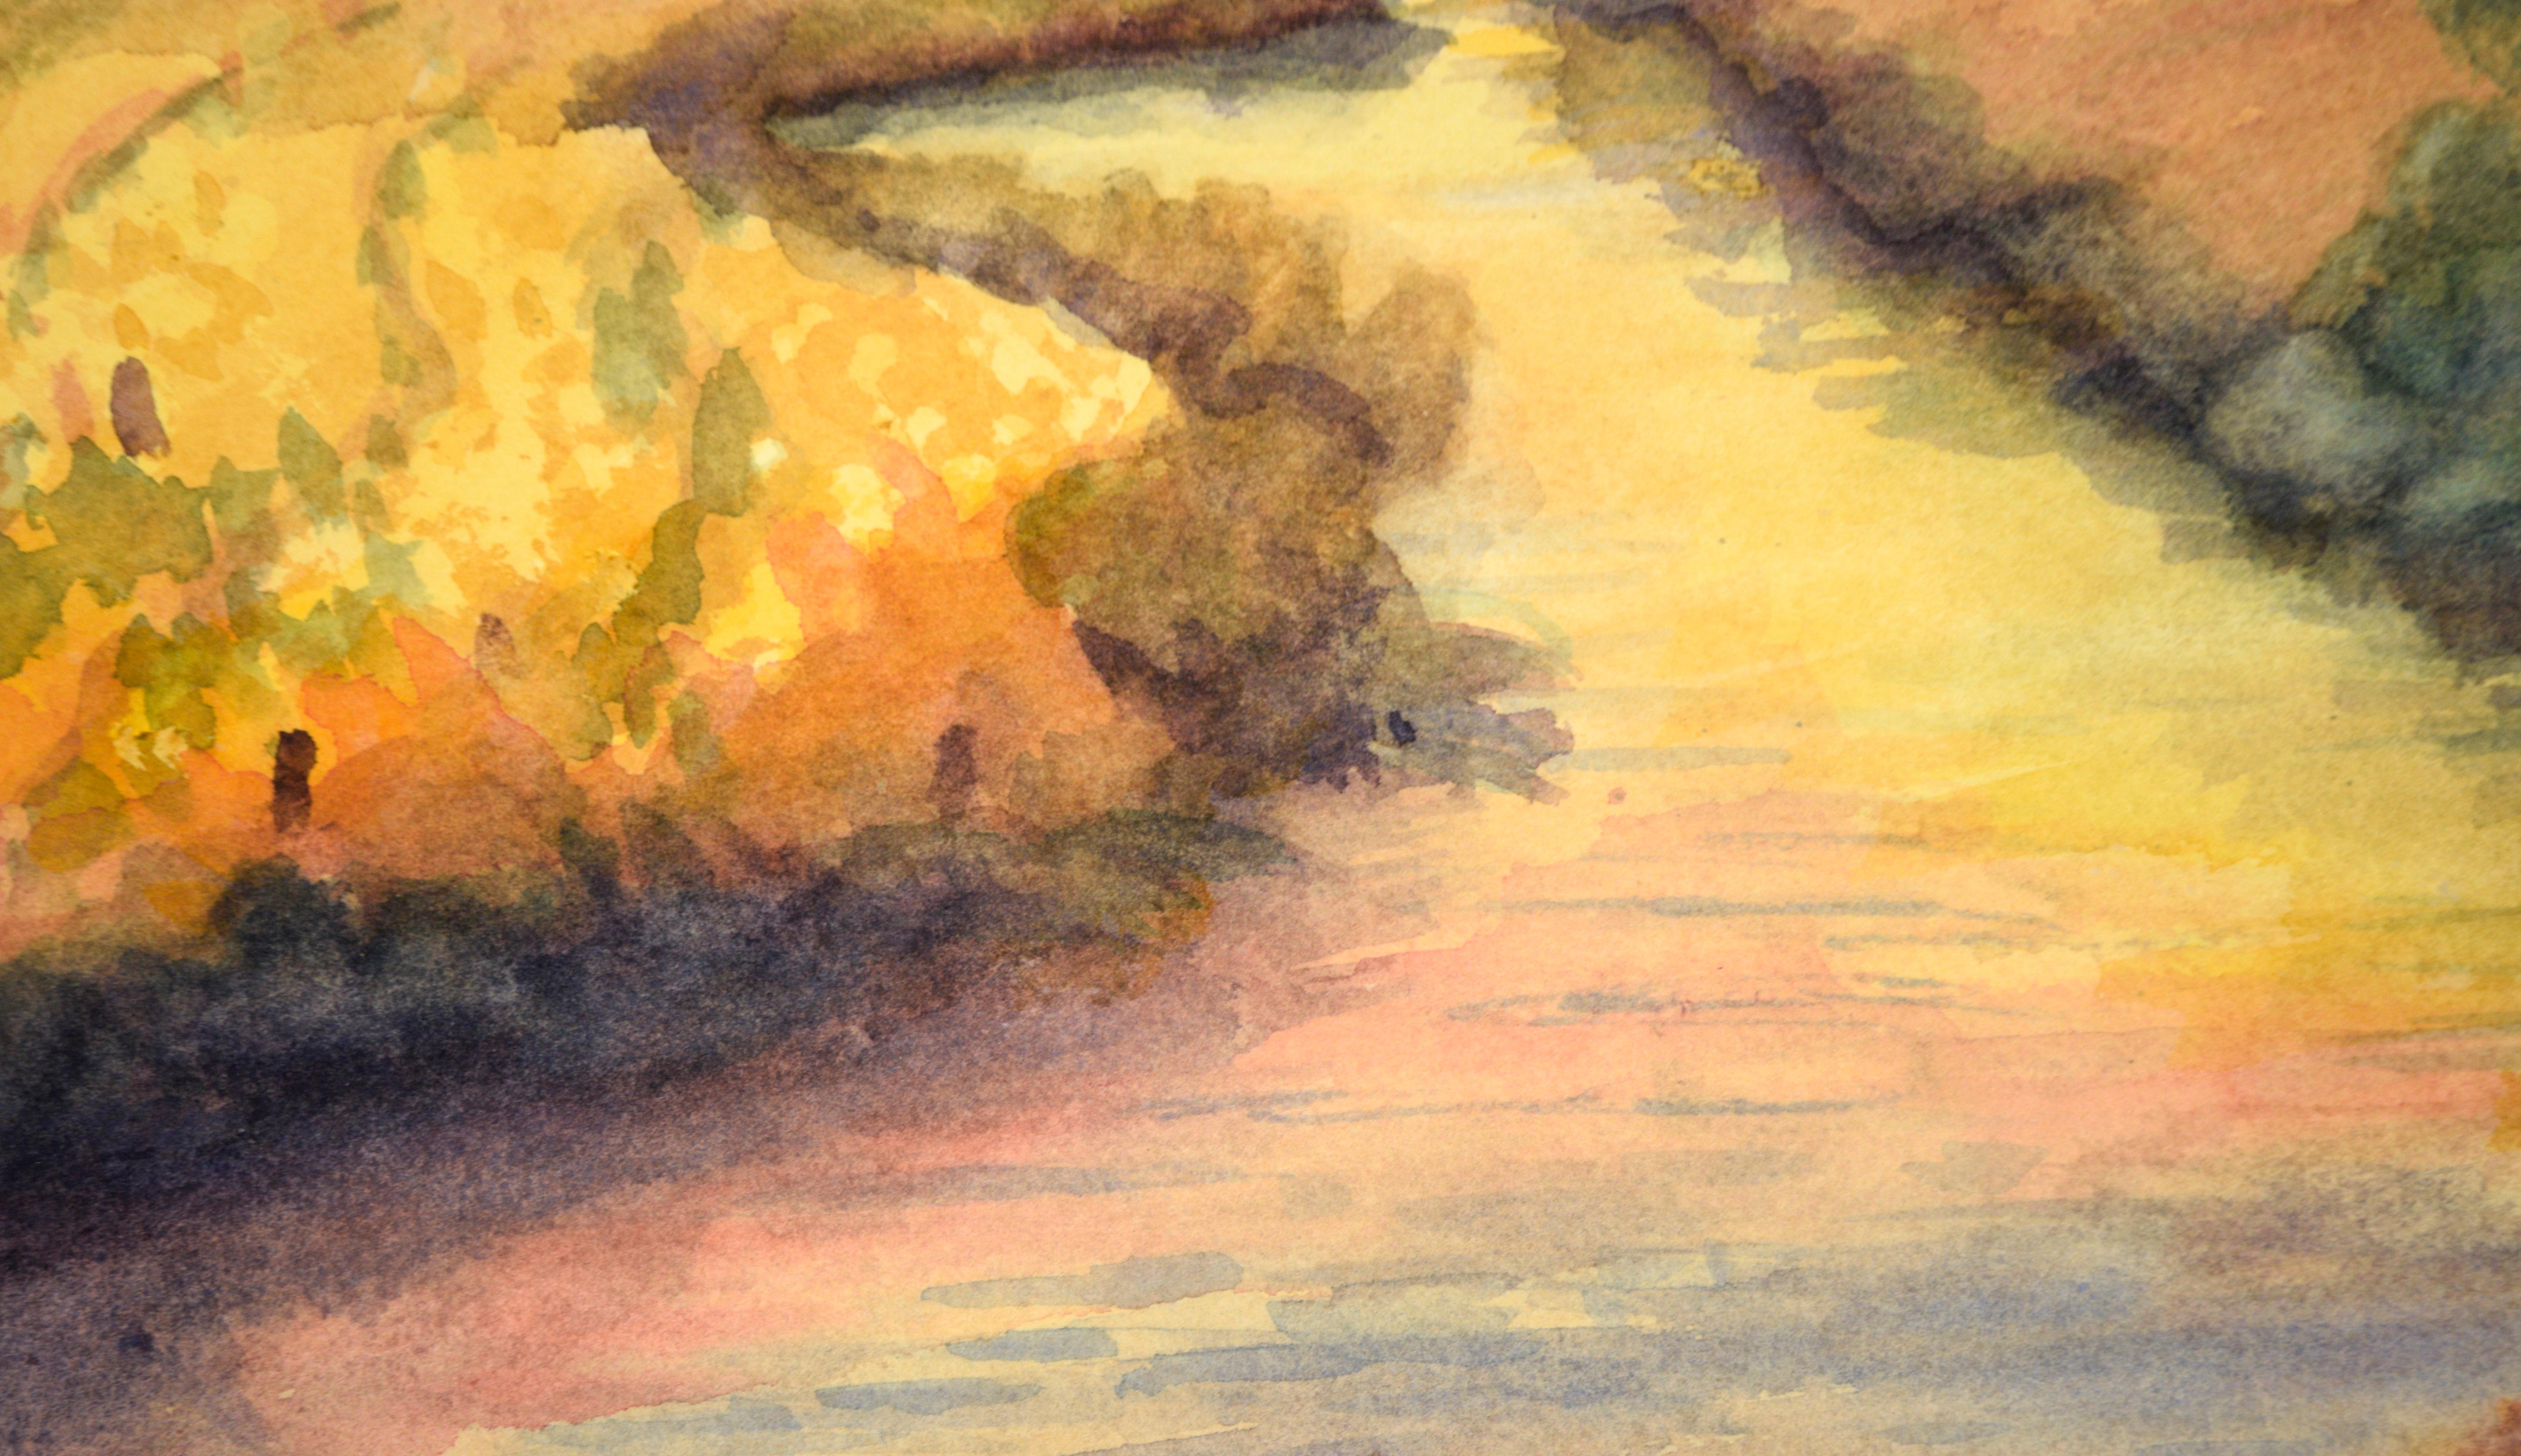 Golden Hour at the River - Watercolor Landscape on Paper For Sale 1